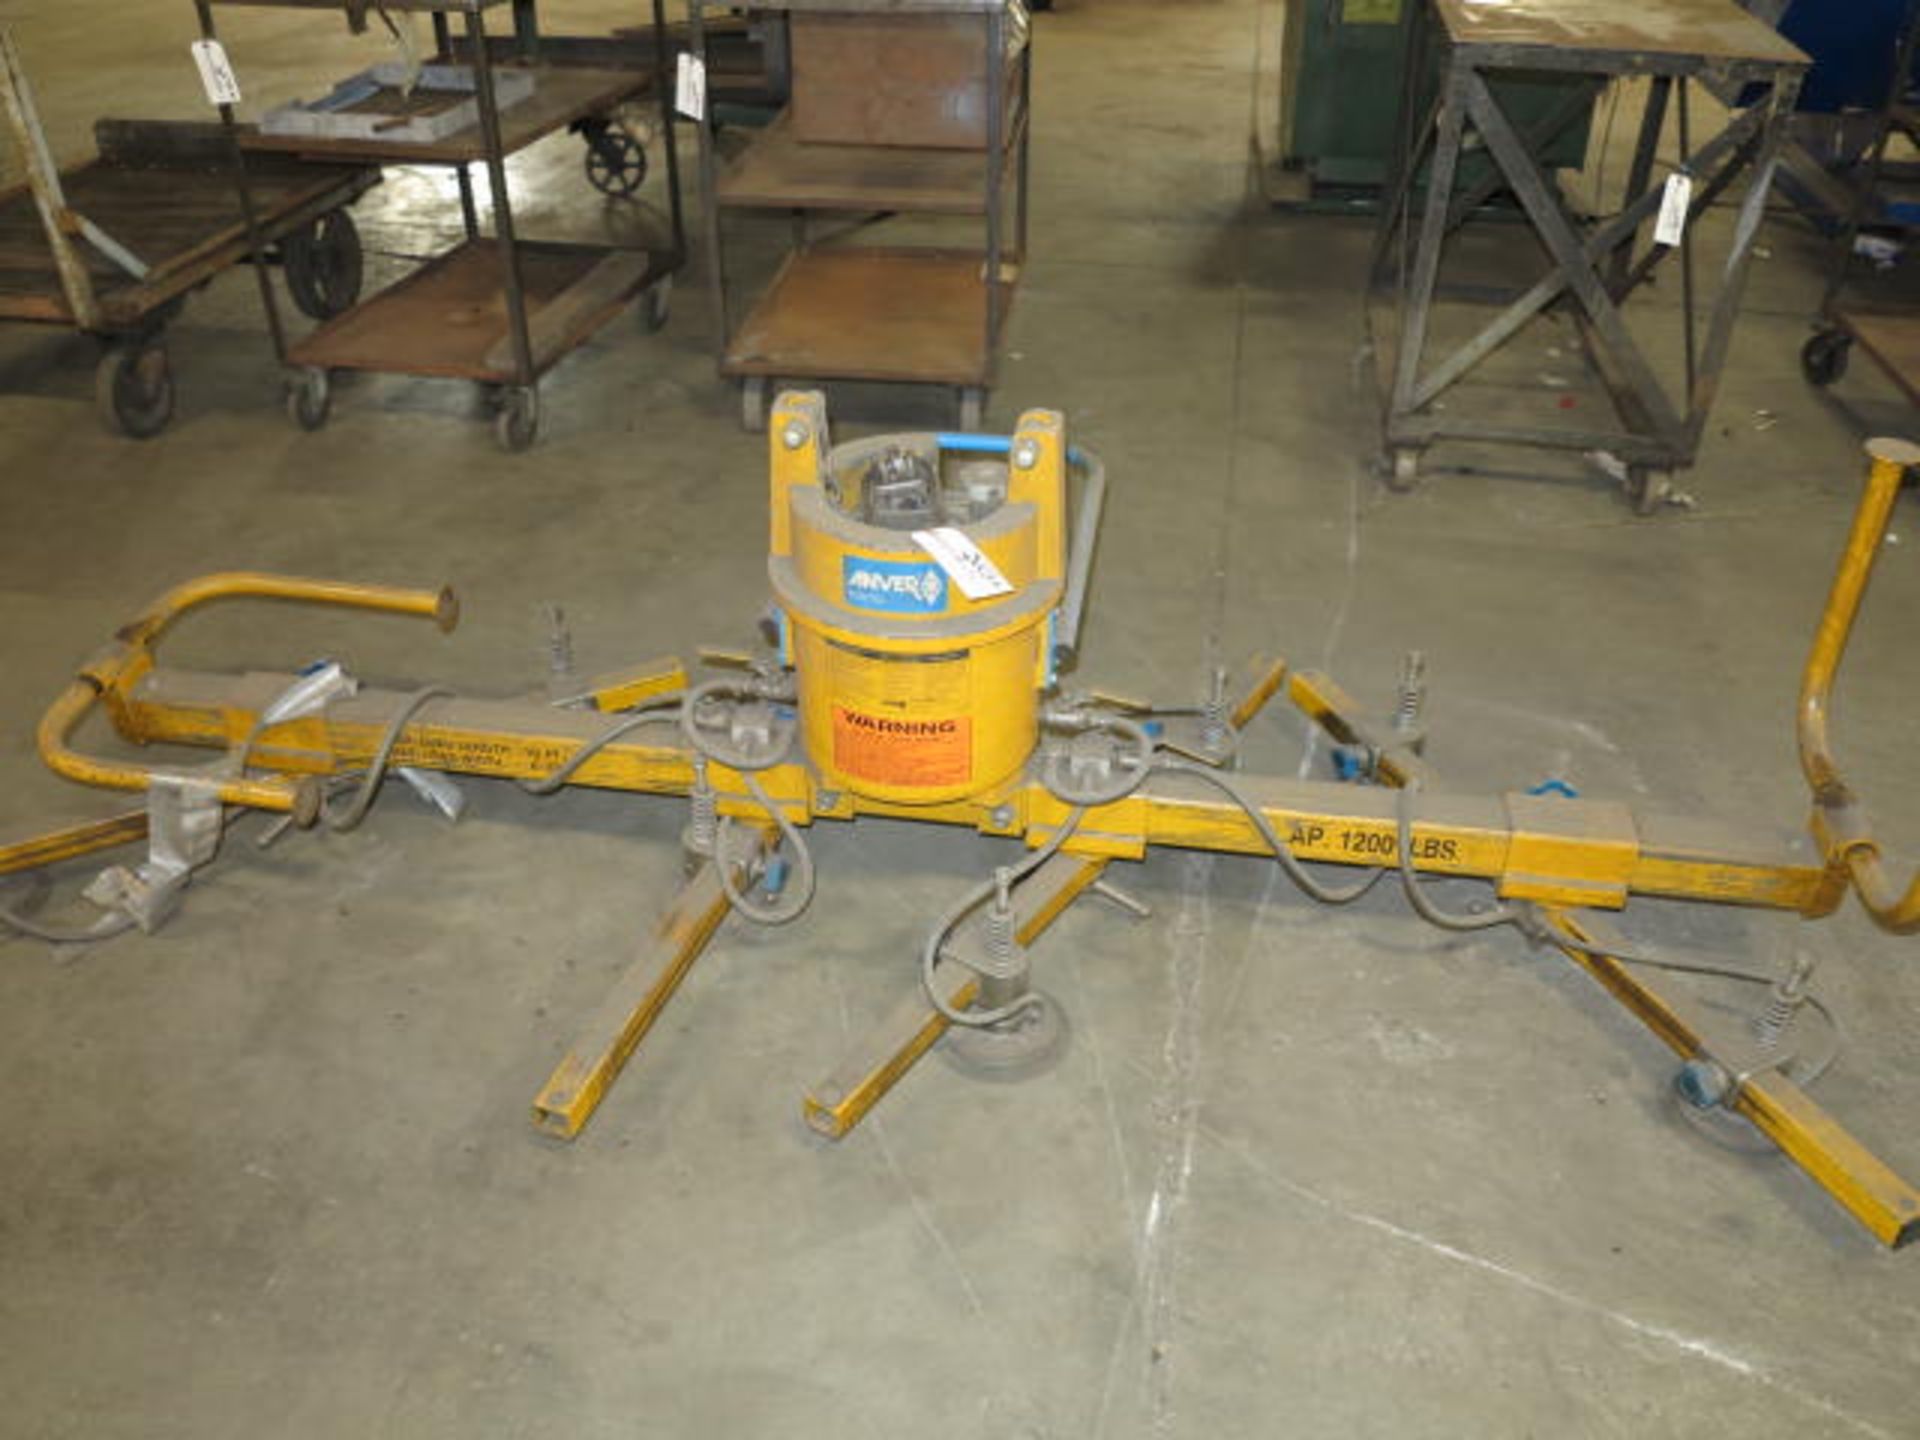 Anver 1200 Pneumatic Lifting Device Located at Sawnsea MA